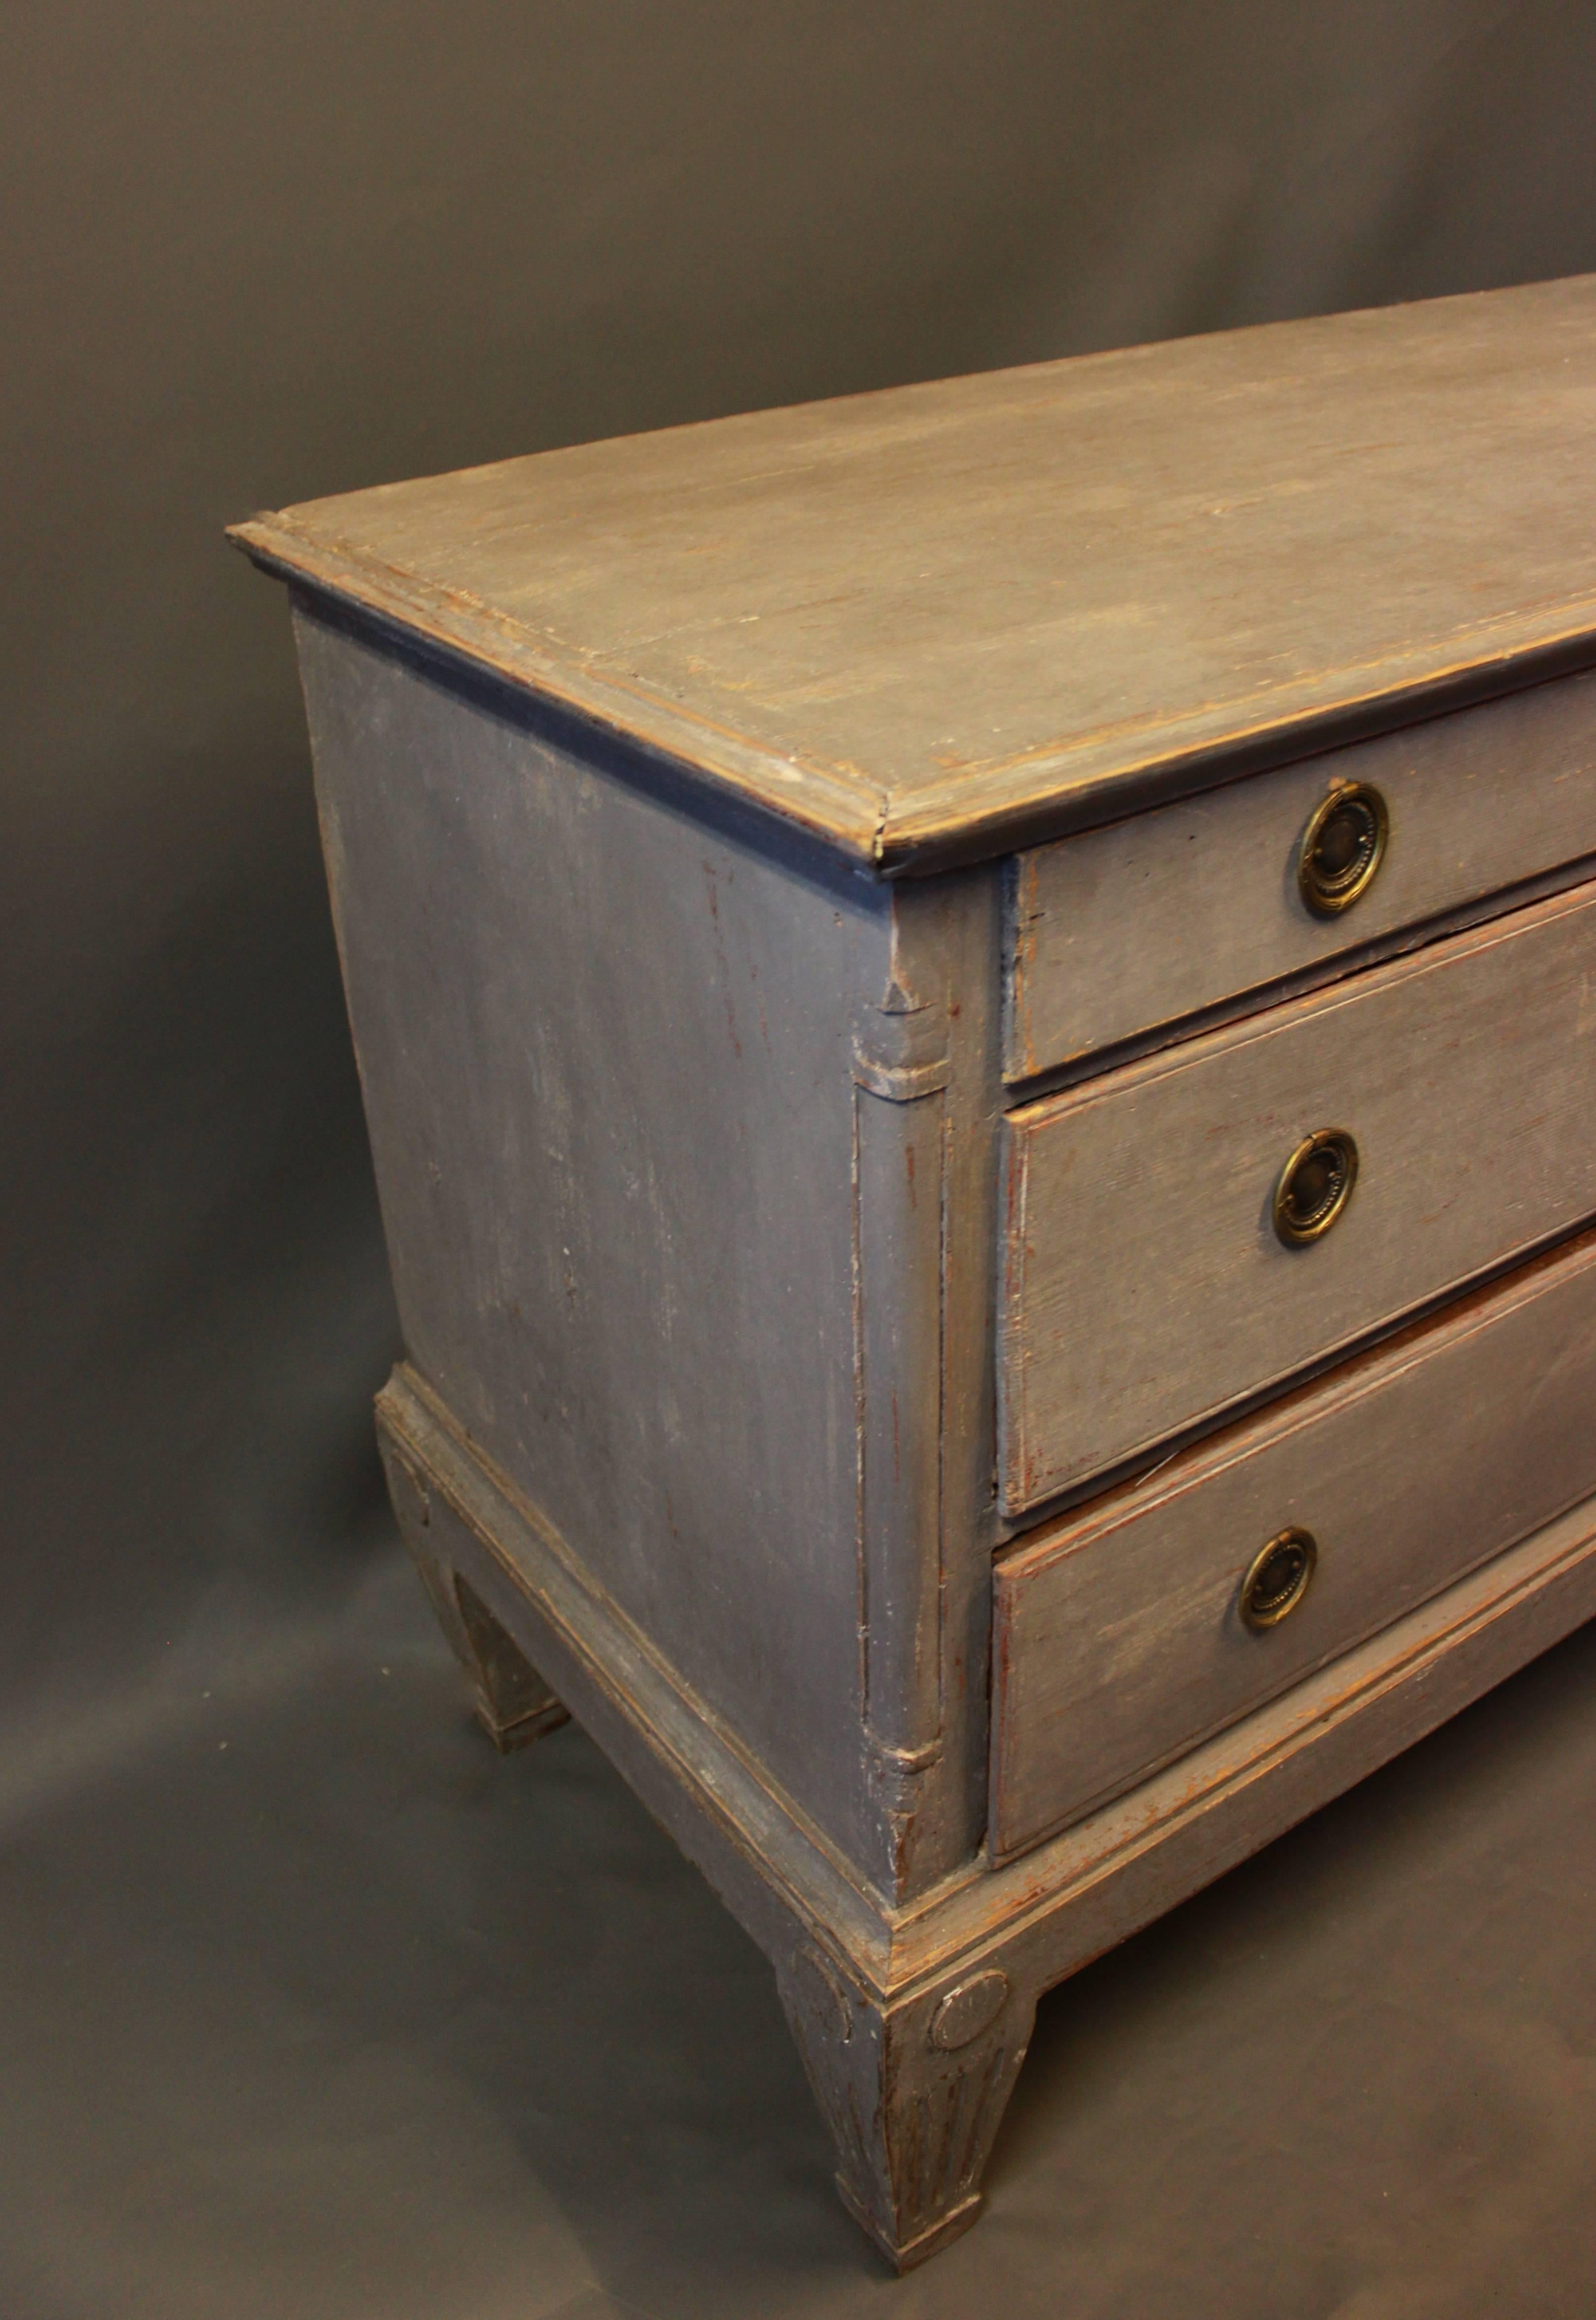 Painted chest of drawers in gray-blue and Gustavian from the 1790s. The chest is in great vintage condition.